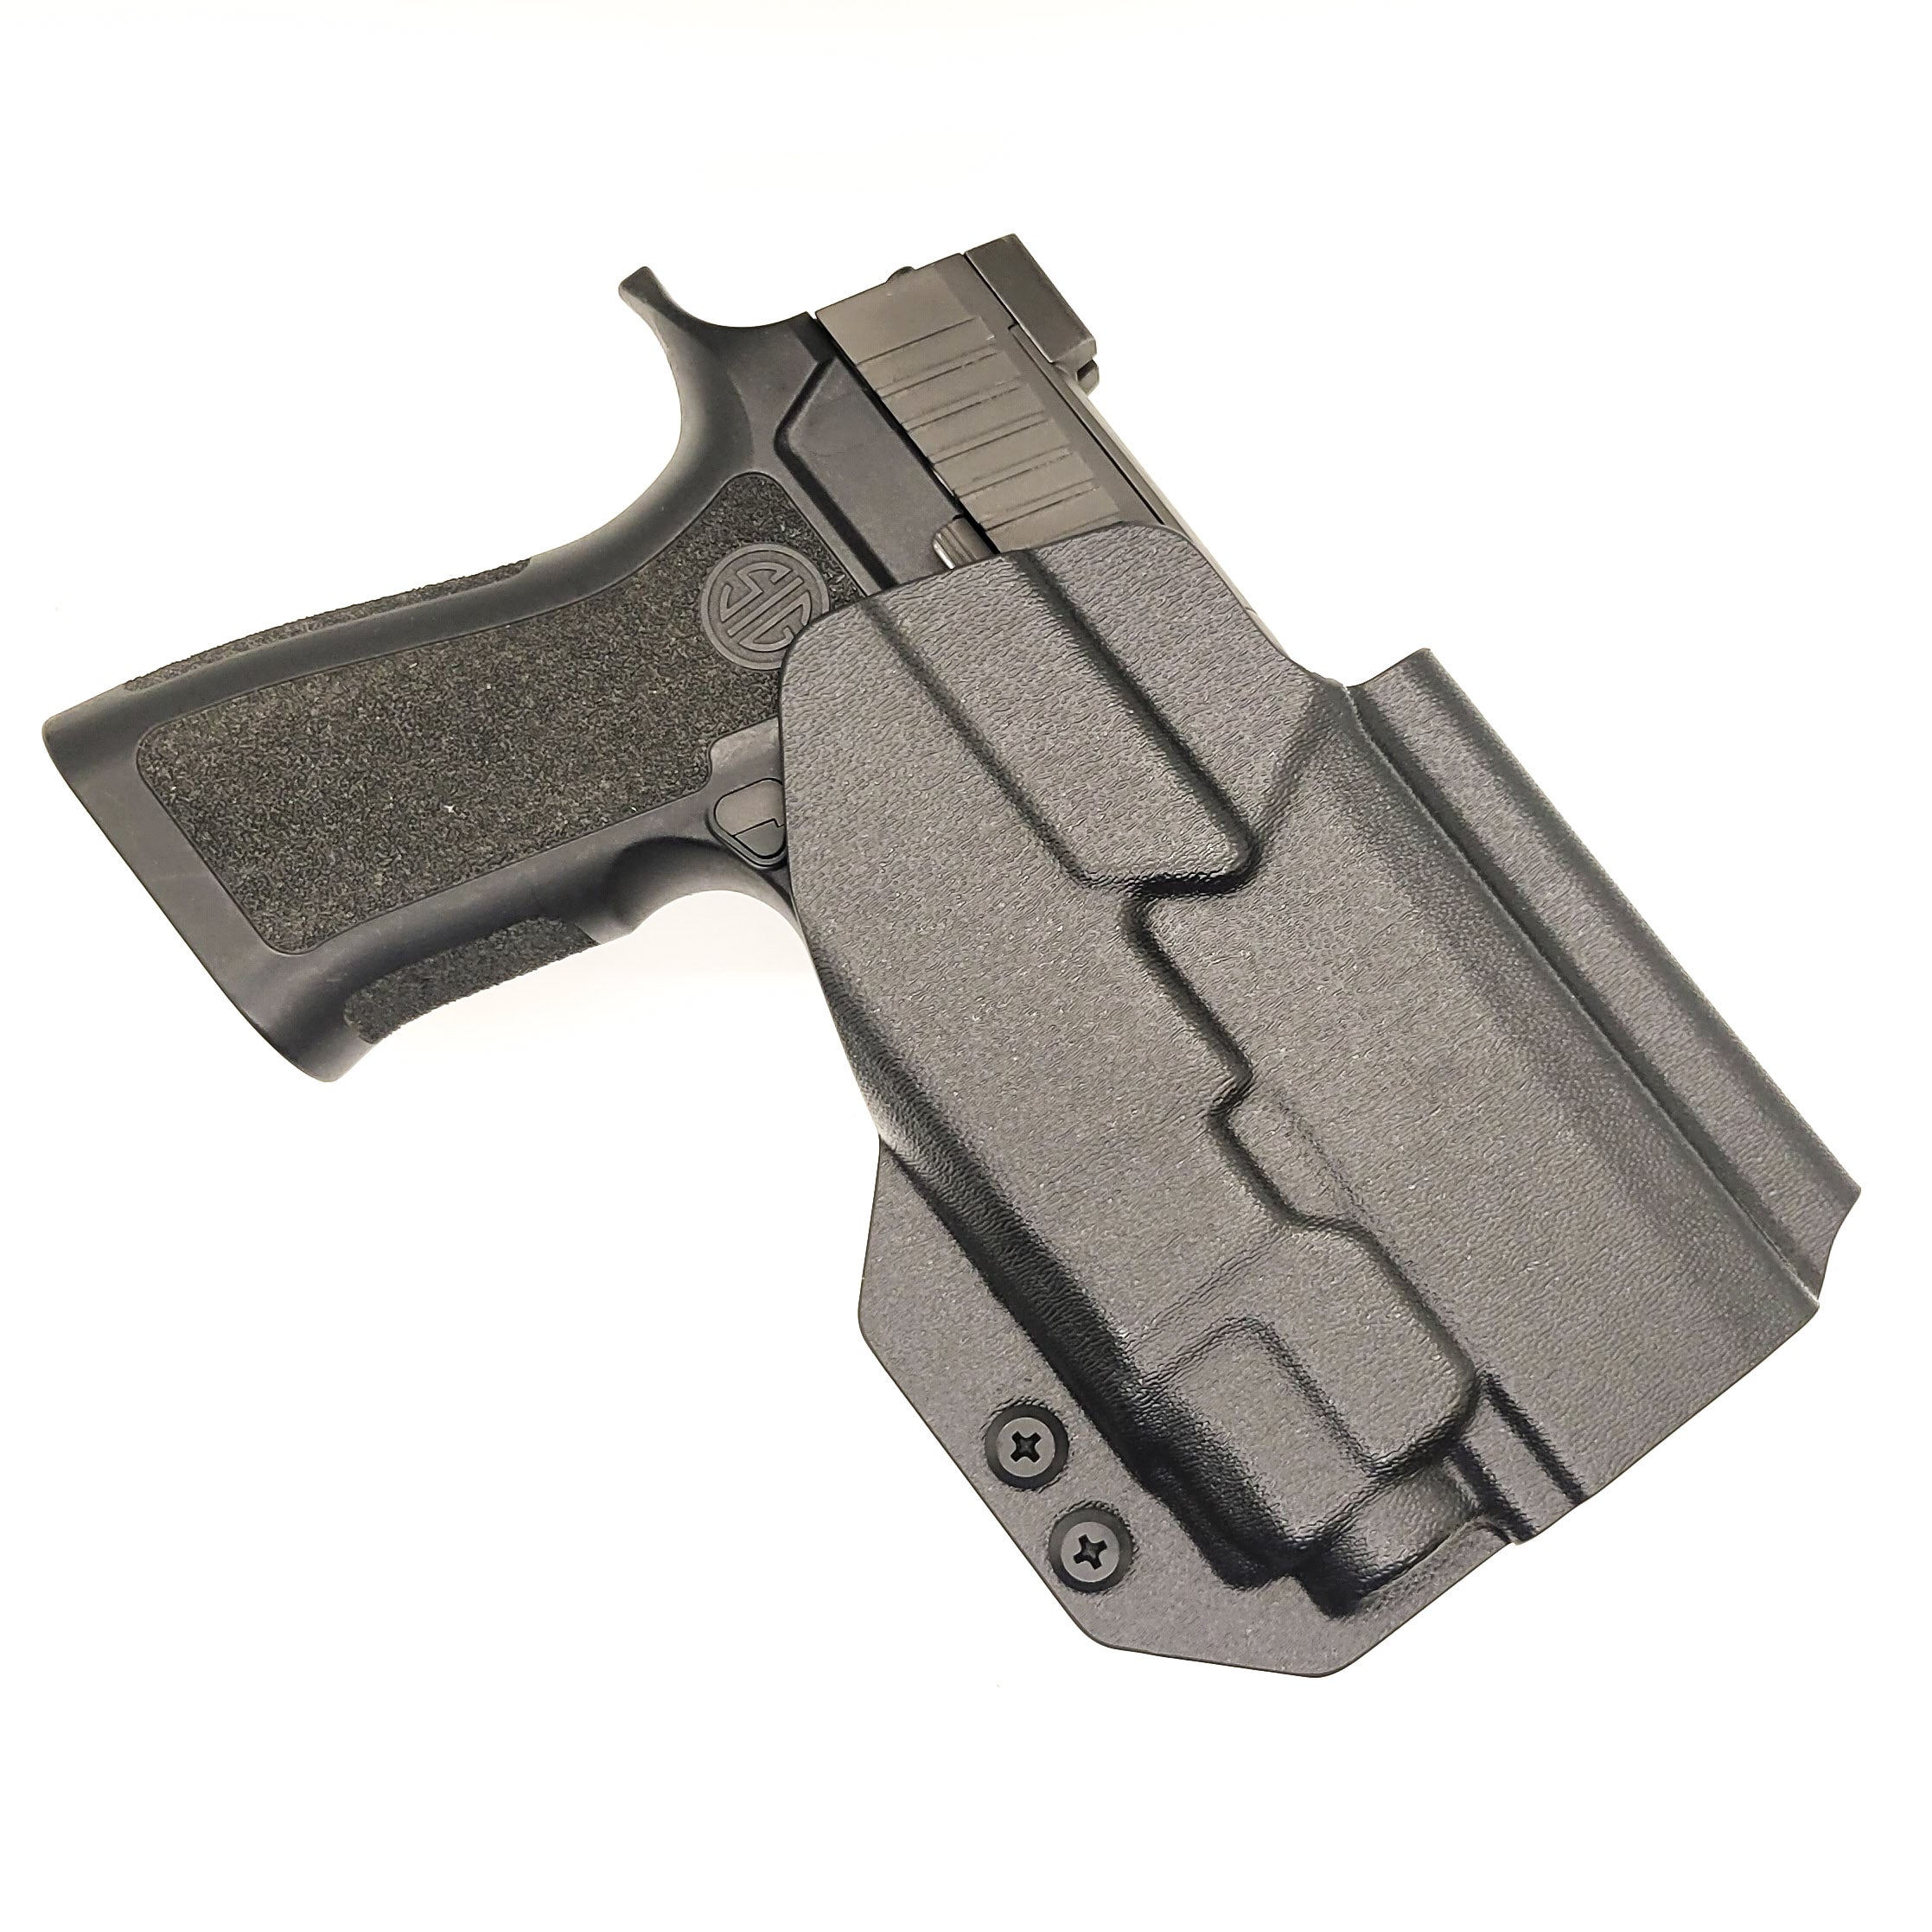 Outside Waistband Holster designed to fit the Sig Sauer P320 Compact, Carry, and M18 pistols with the Streamlight TLR-8 or TLR-8A light and Align Tactical Thumb Rest Takedown lever mounted to the pistol.